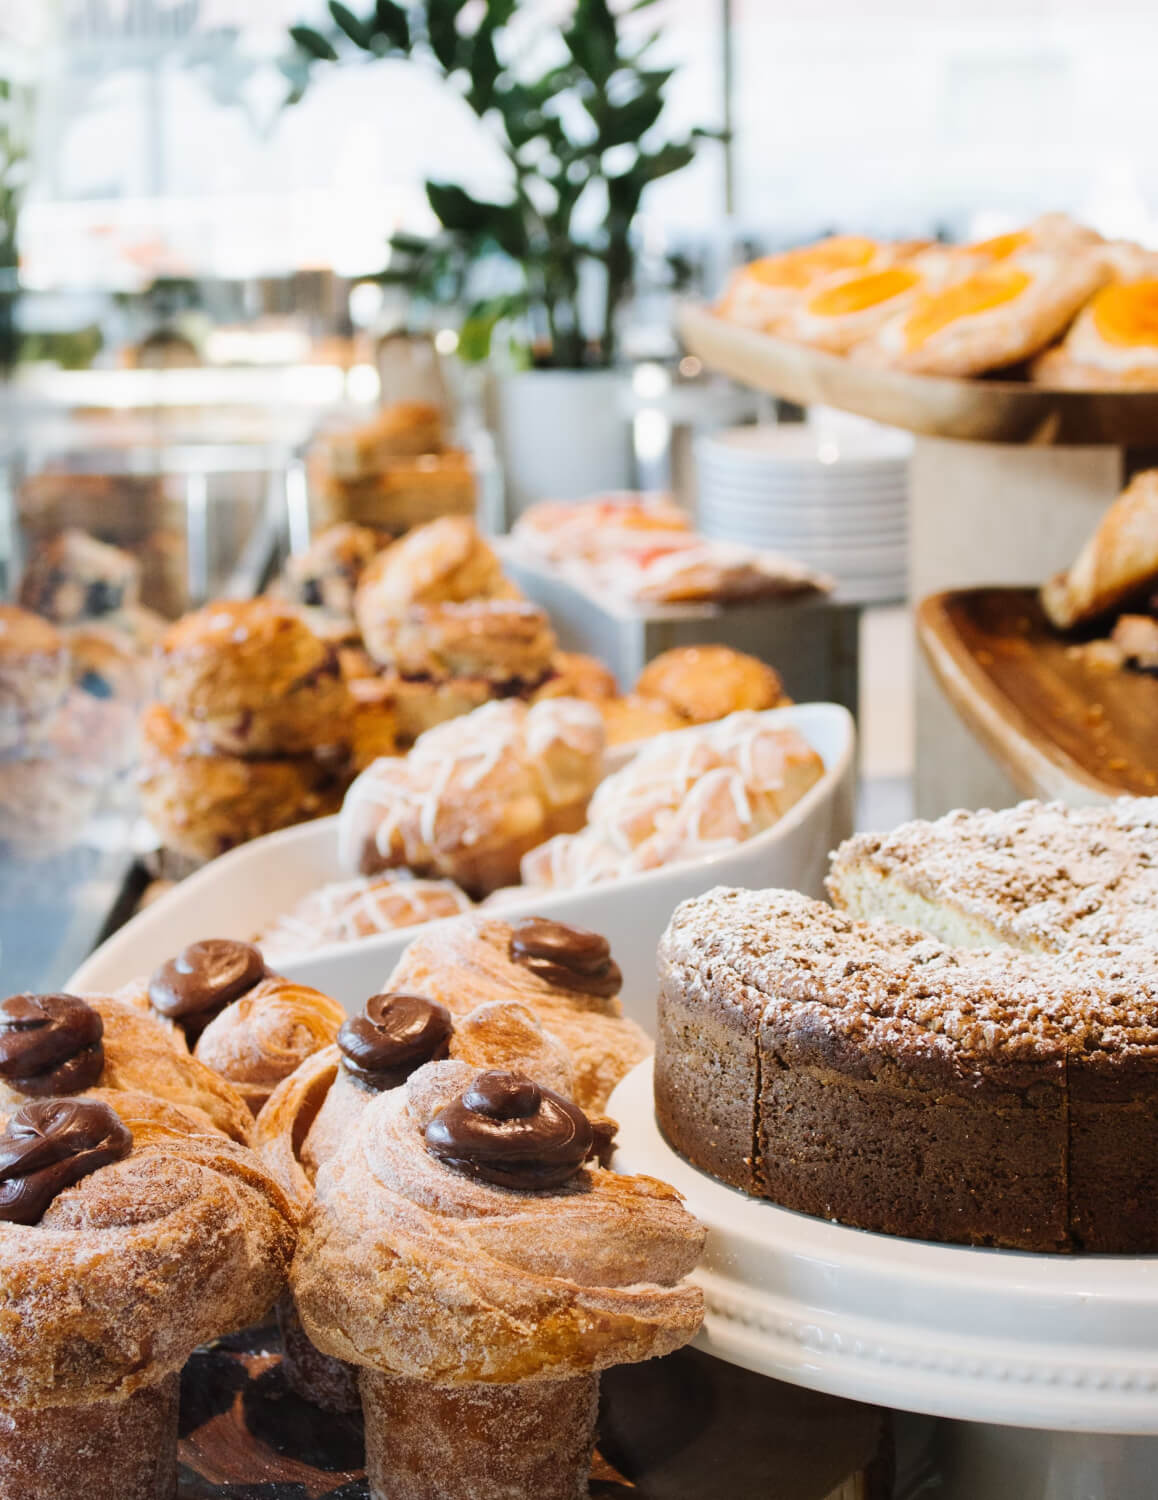 Solutions for Bakeries